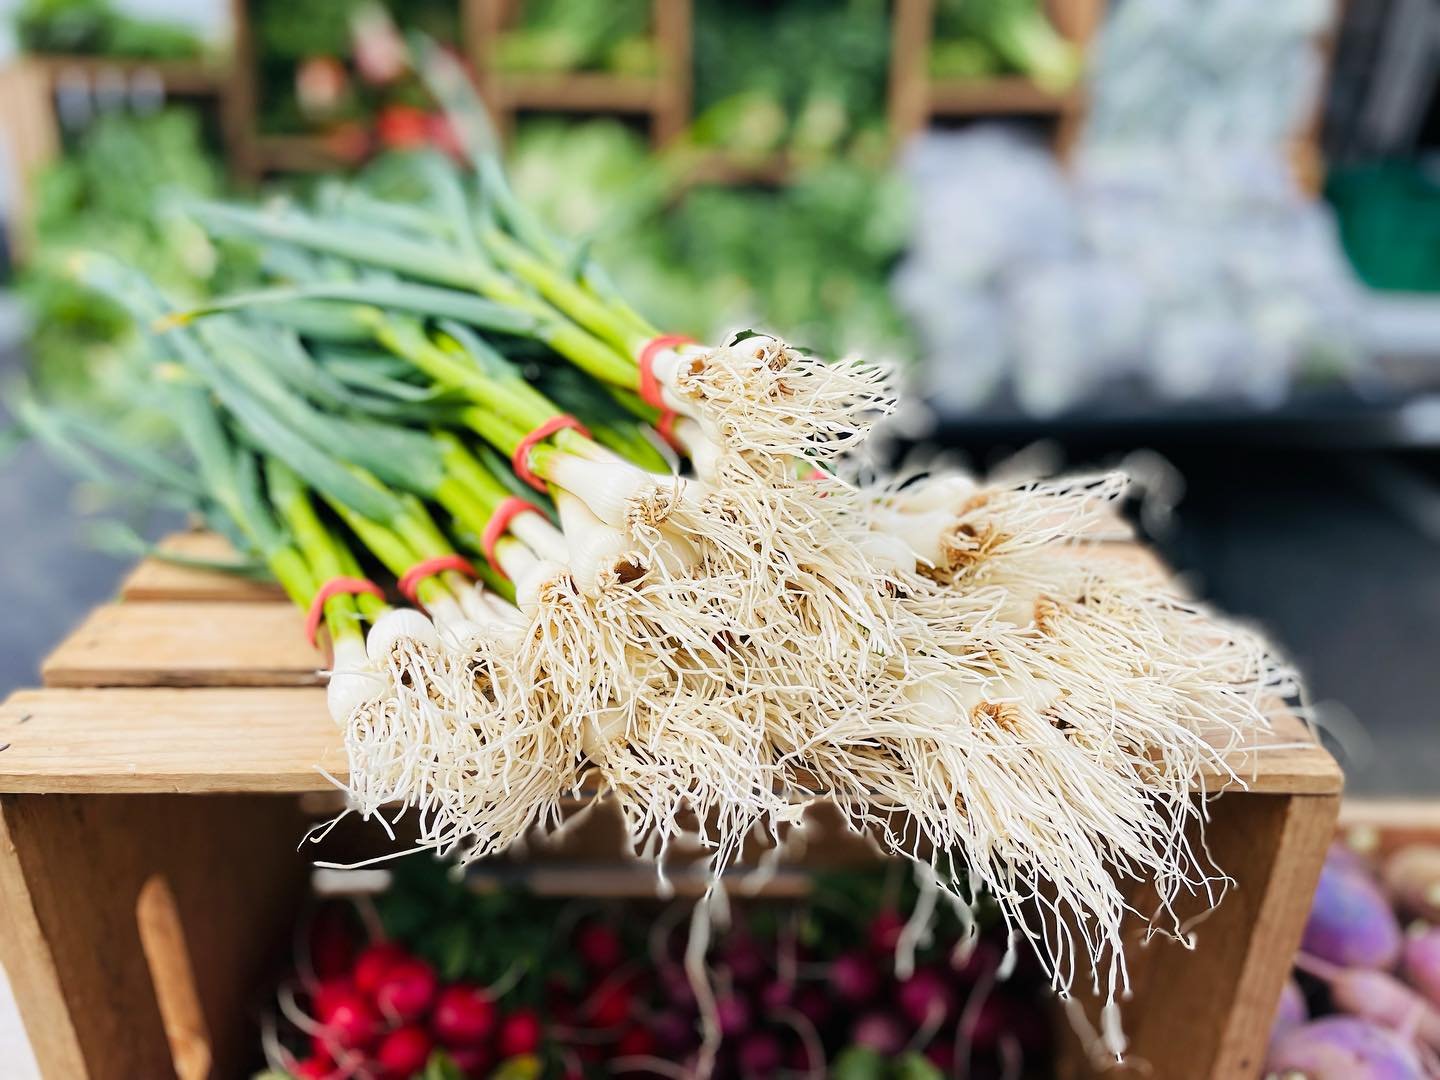 Doesn&rsquo;t get fresher than this. @longseasonfarm Get on line before they sell out. 🥬 Every Sunday. 10-2. @beaconfarmersmarket Voted BEST FARMERS&rsquo; MARKET by @hudsonvalleymag

#BeaconFarmersMarket #CommunityStrong #farmersmarkets #thingstodo